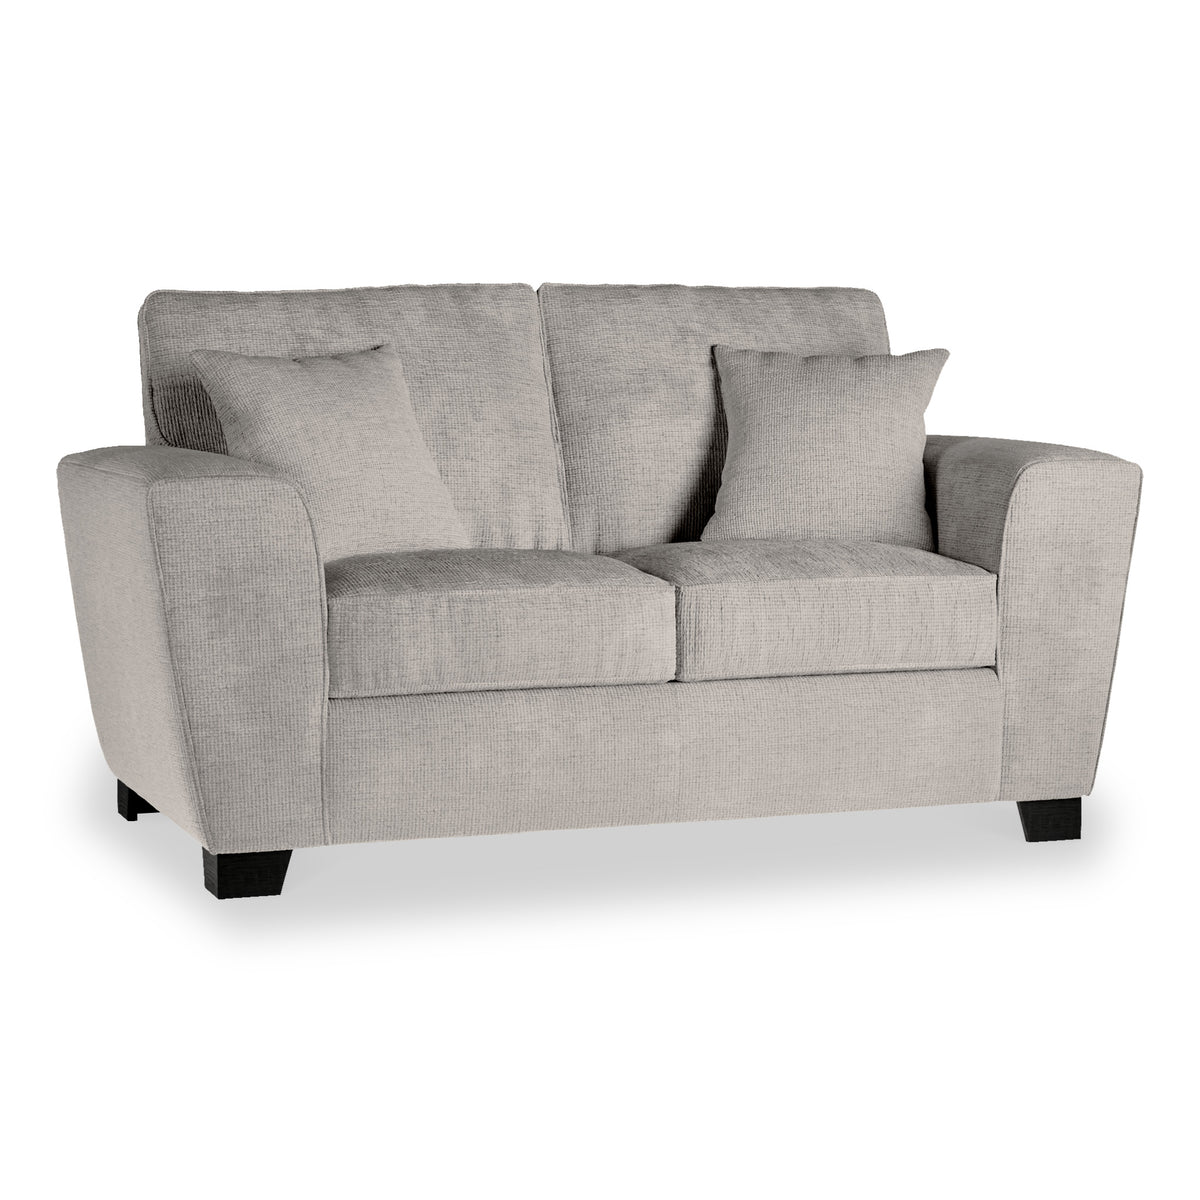 Chester Pewter Hopsack 2 Seater Sofa from Roseland Furniture